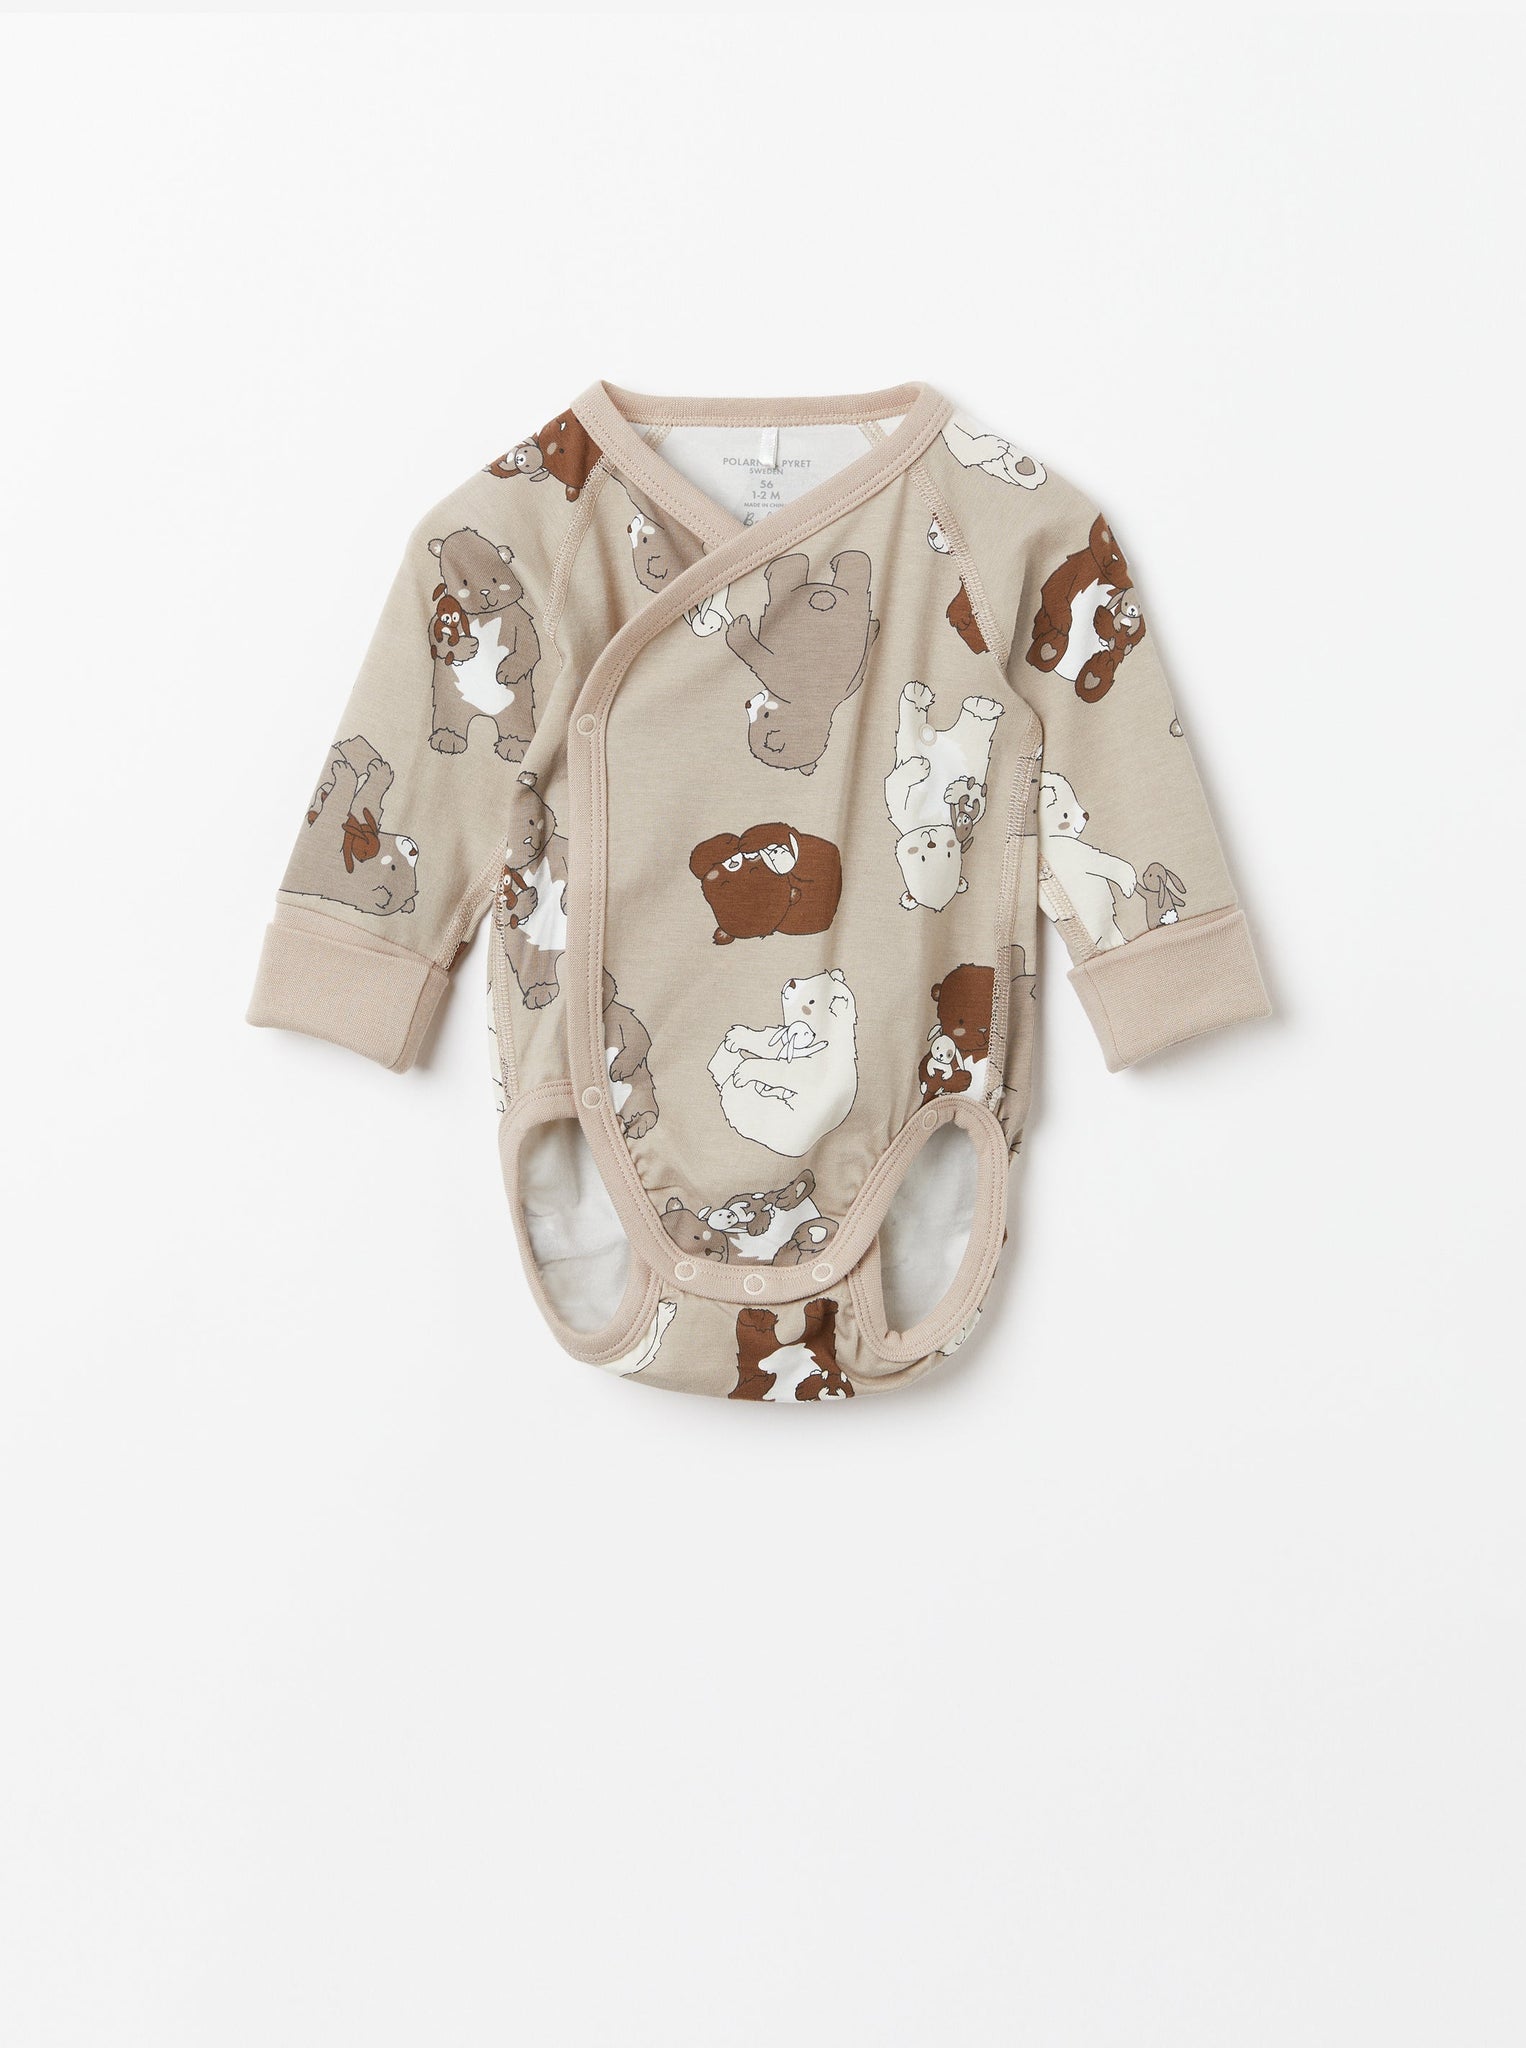 Bear Print Wraparound Babygrow from the Polarn O. Pyret baby collection. Ethically produced baby clothing.